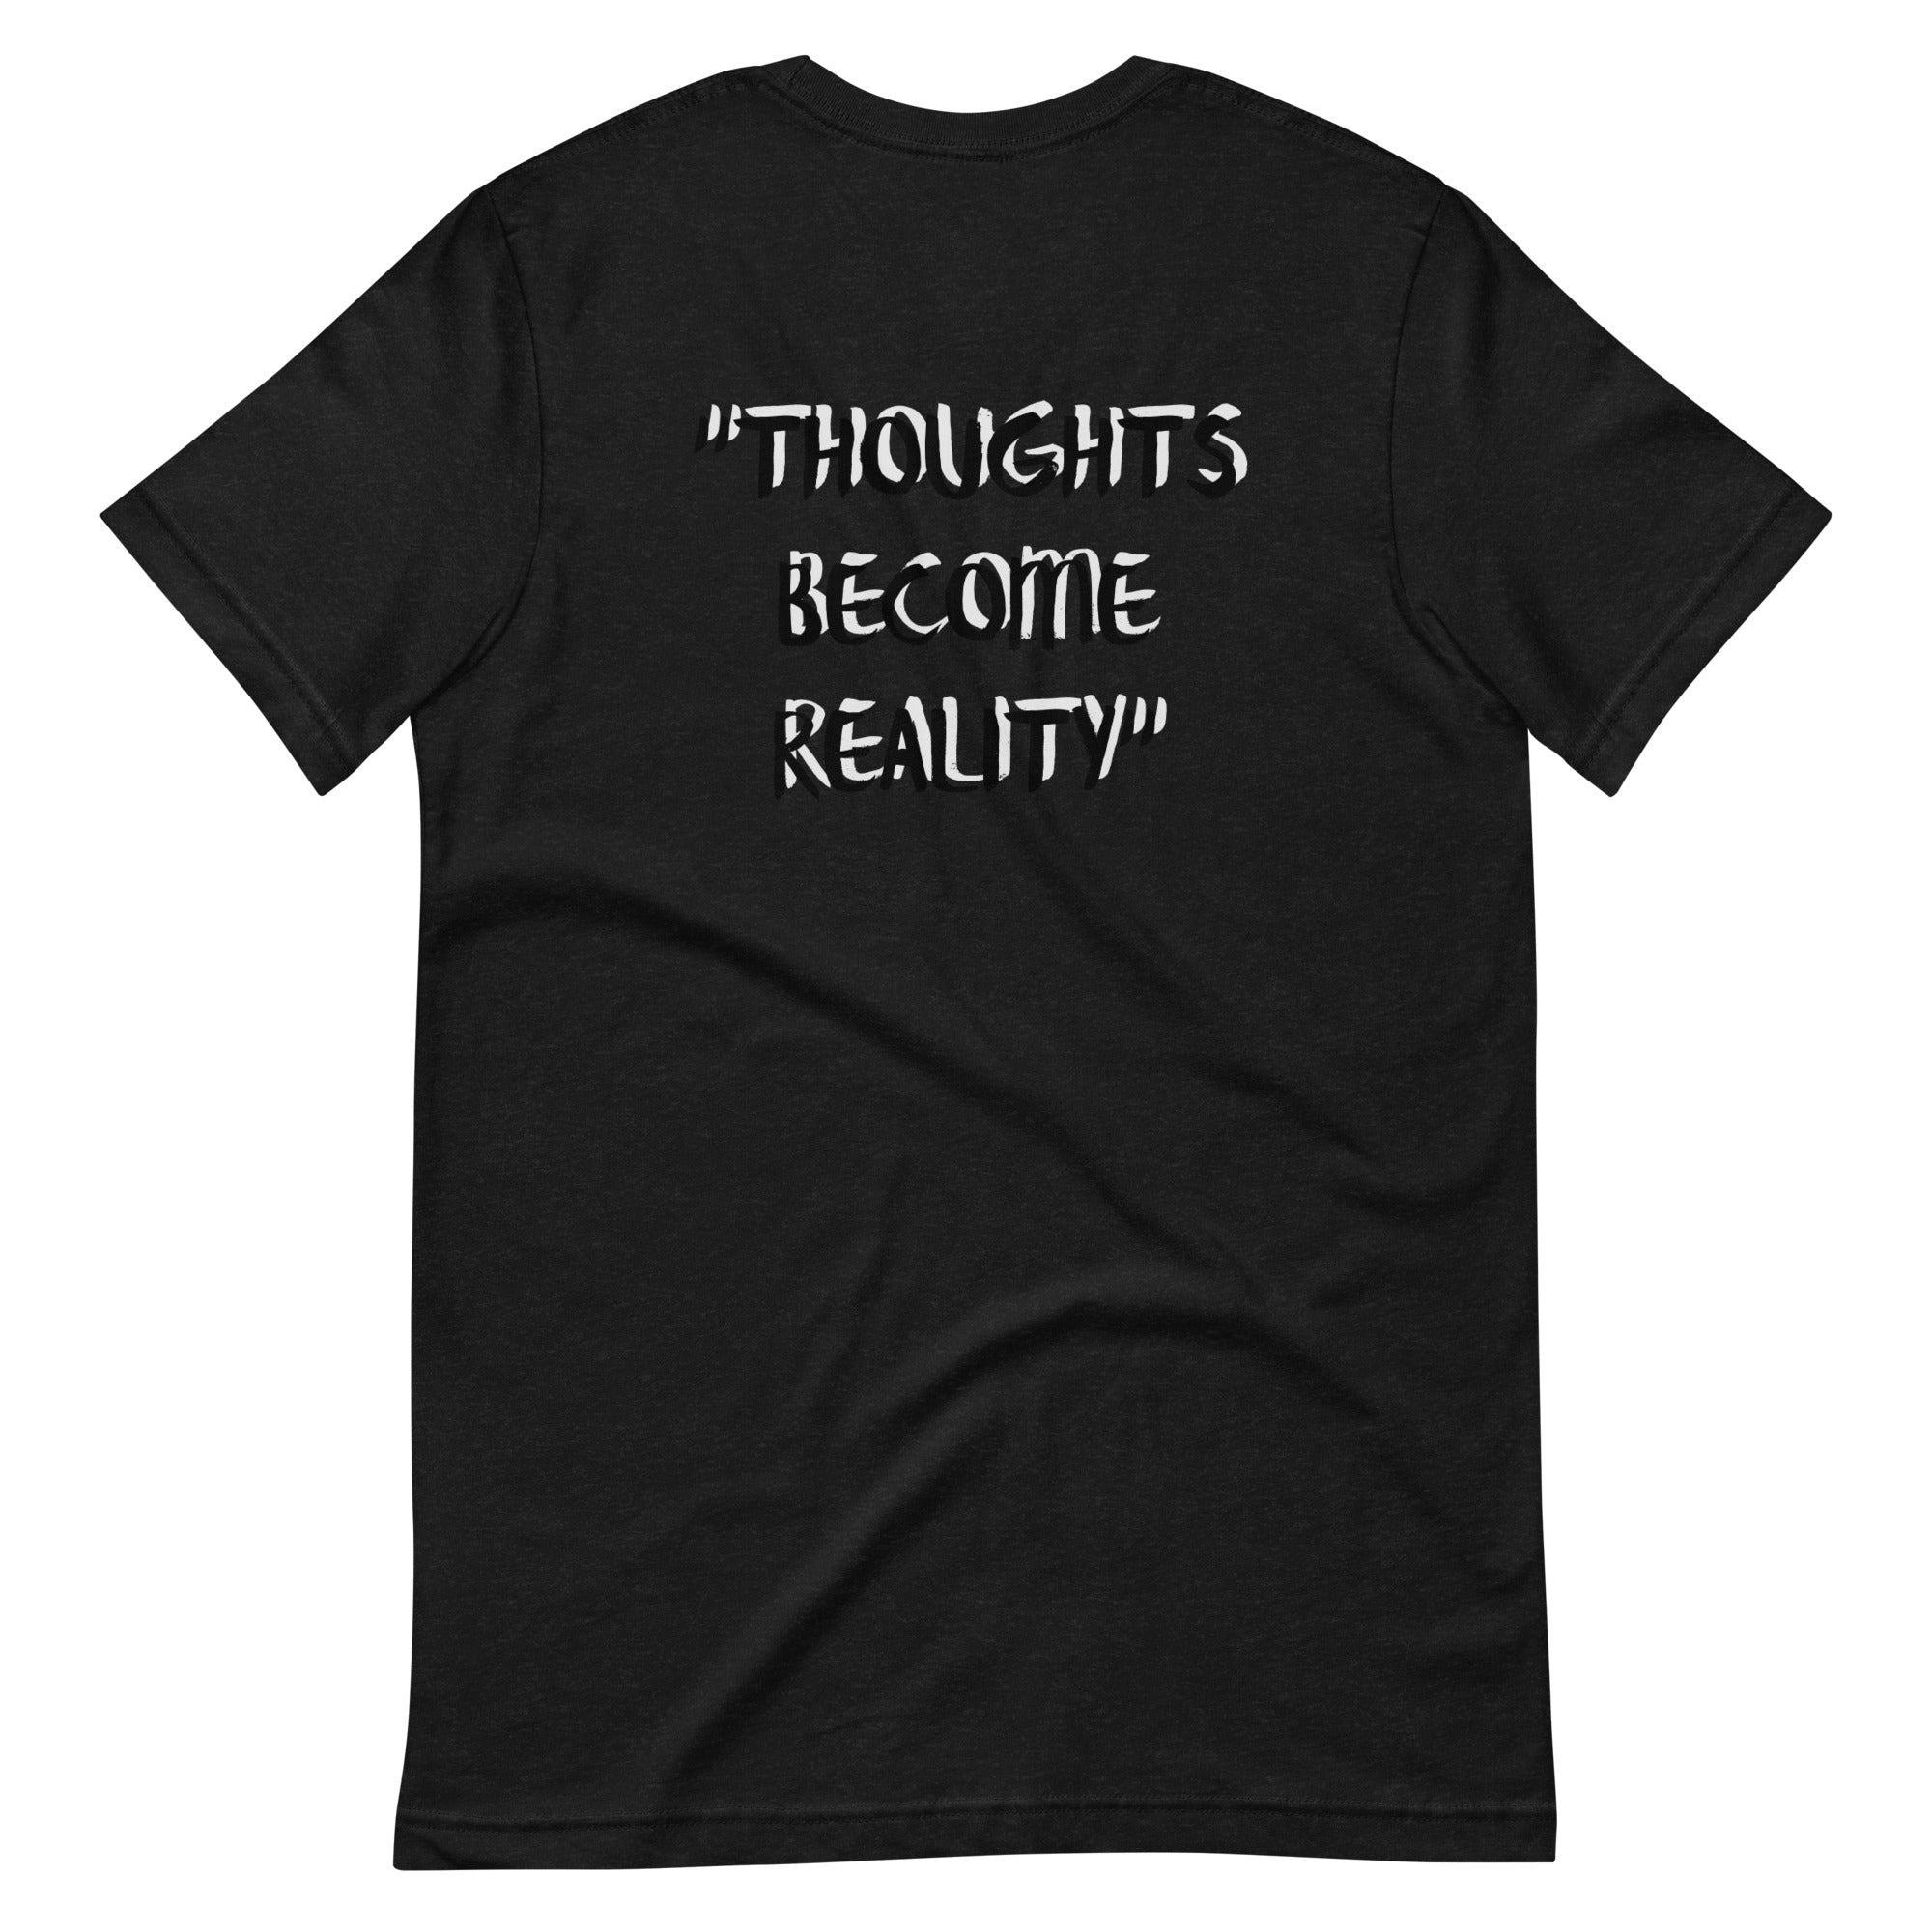 Unisex t-shirt "Thoughts become reality"